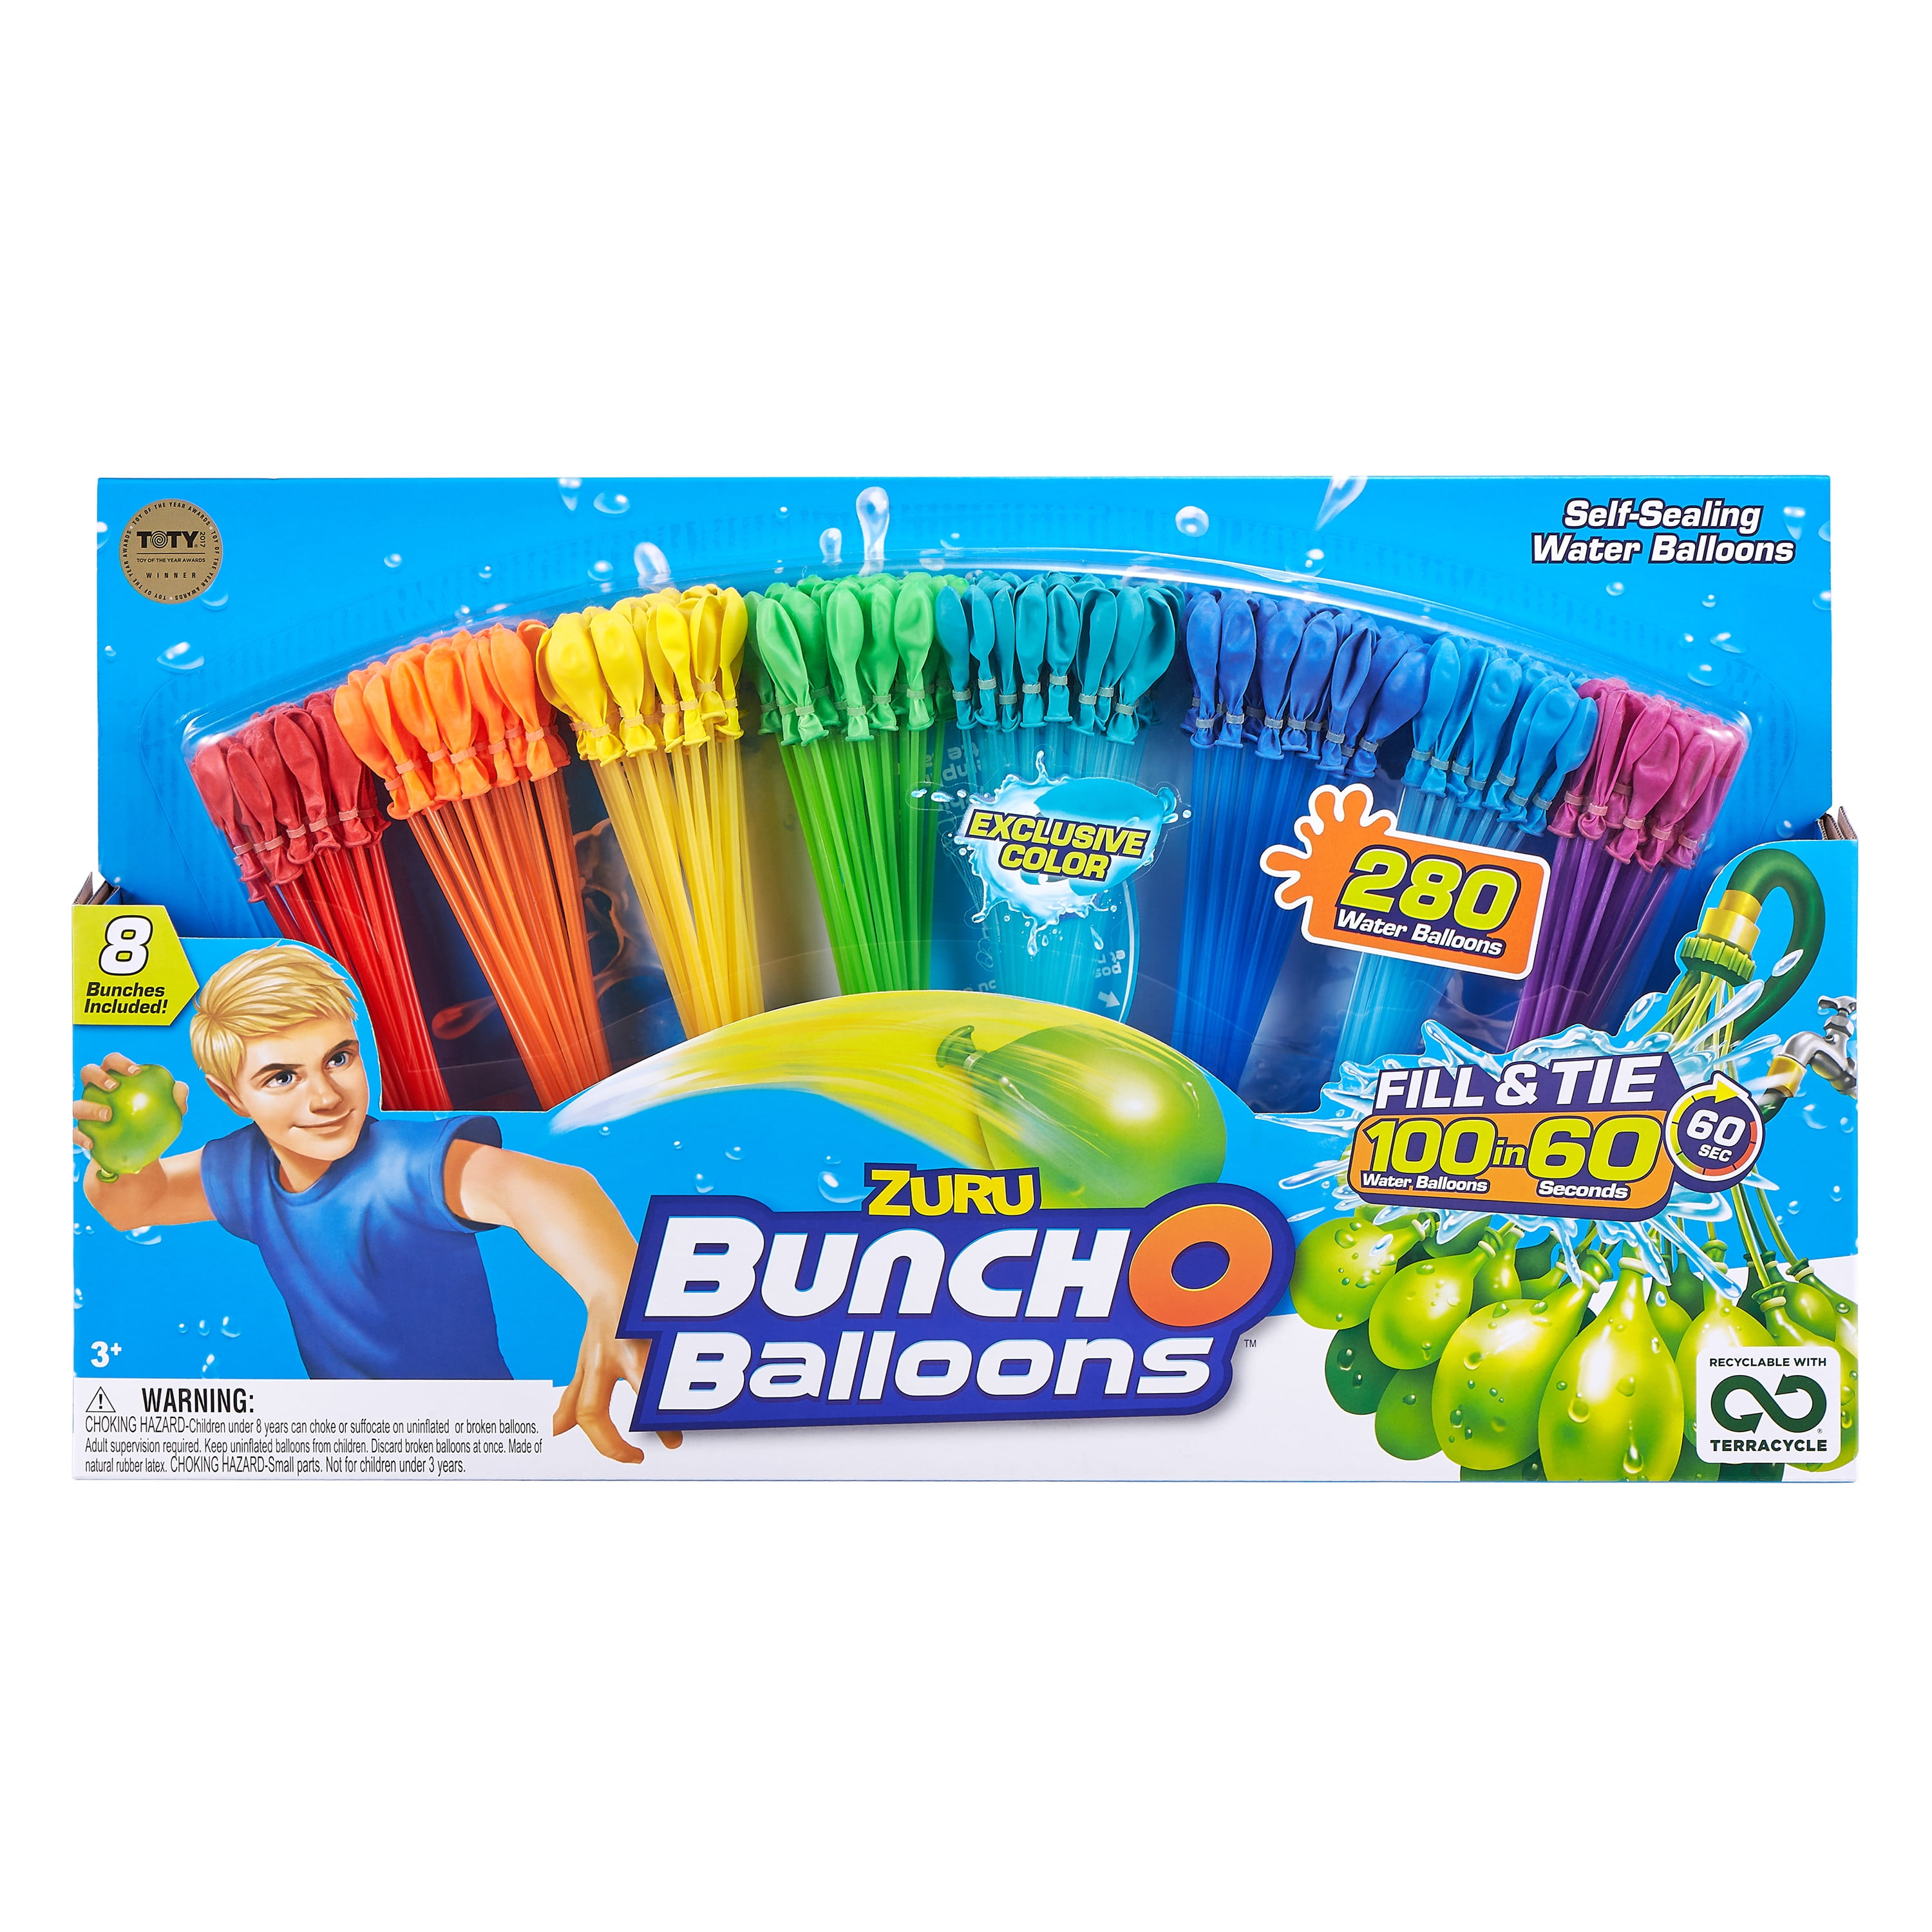 555 pcs 15 Bunch O Instant water Balloons,Self-Sealing,already tied waterballoon 